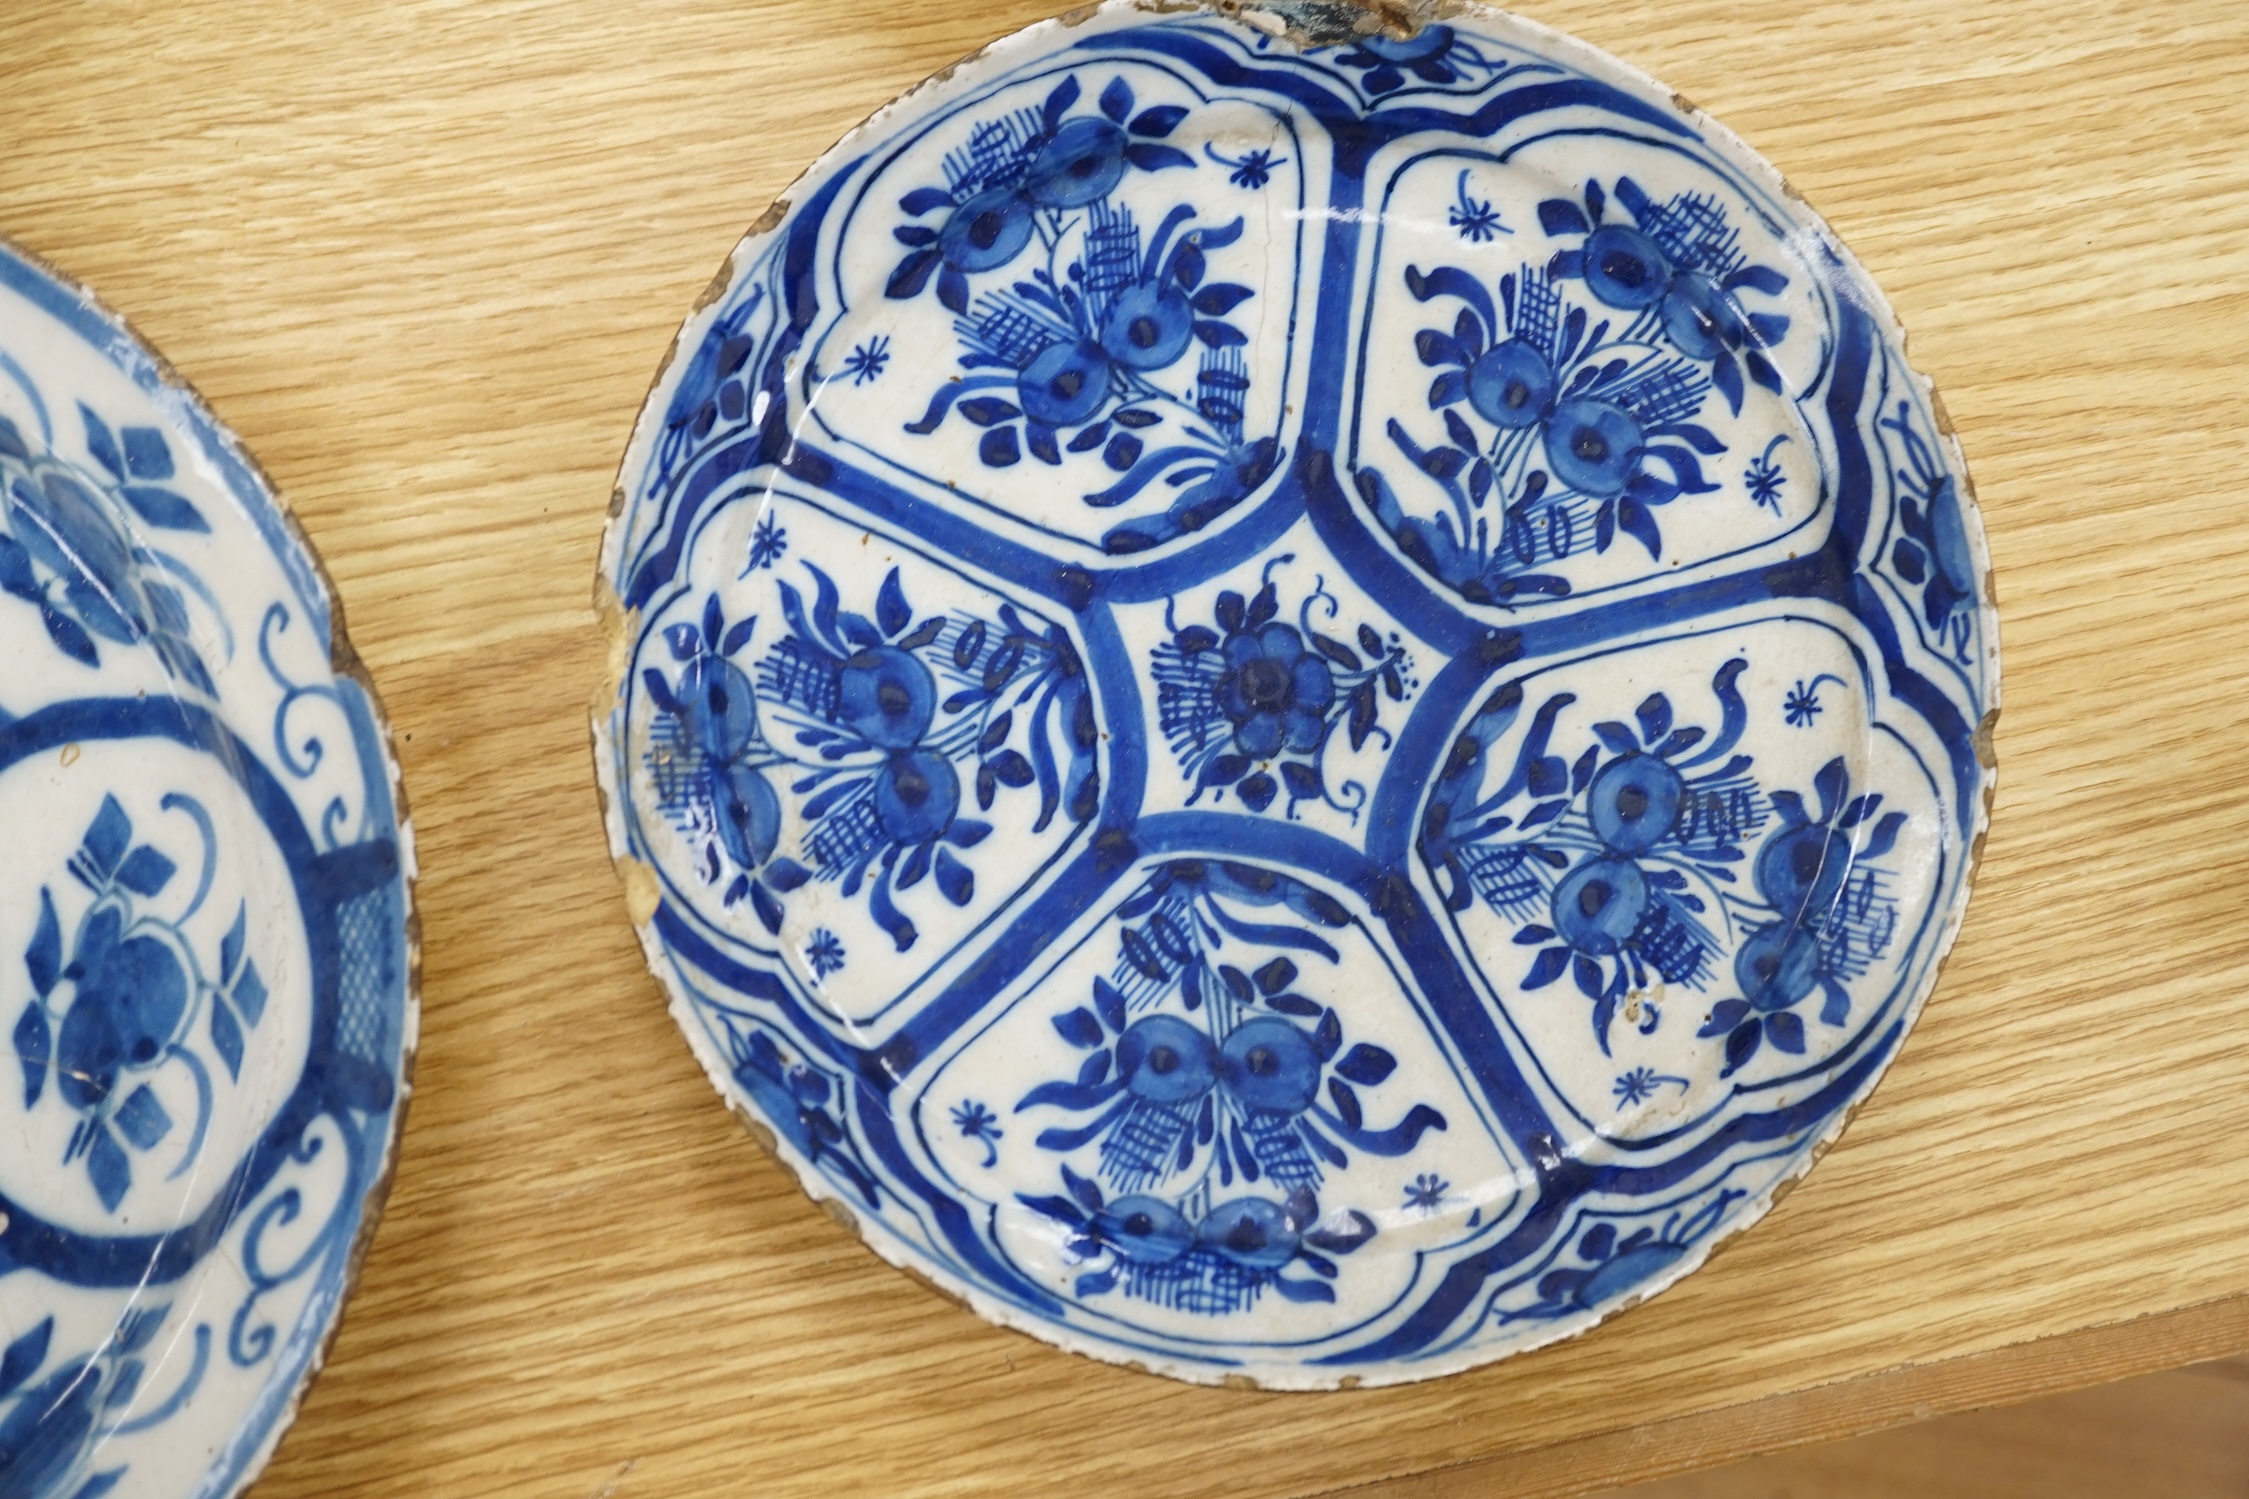 Four various continental delftware dishes, 18th and 19th century, largest 31cm diameter. Condition - various cracks and chipping to edges